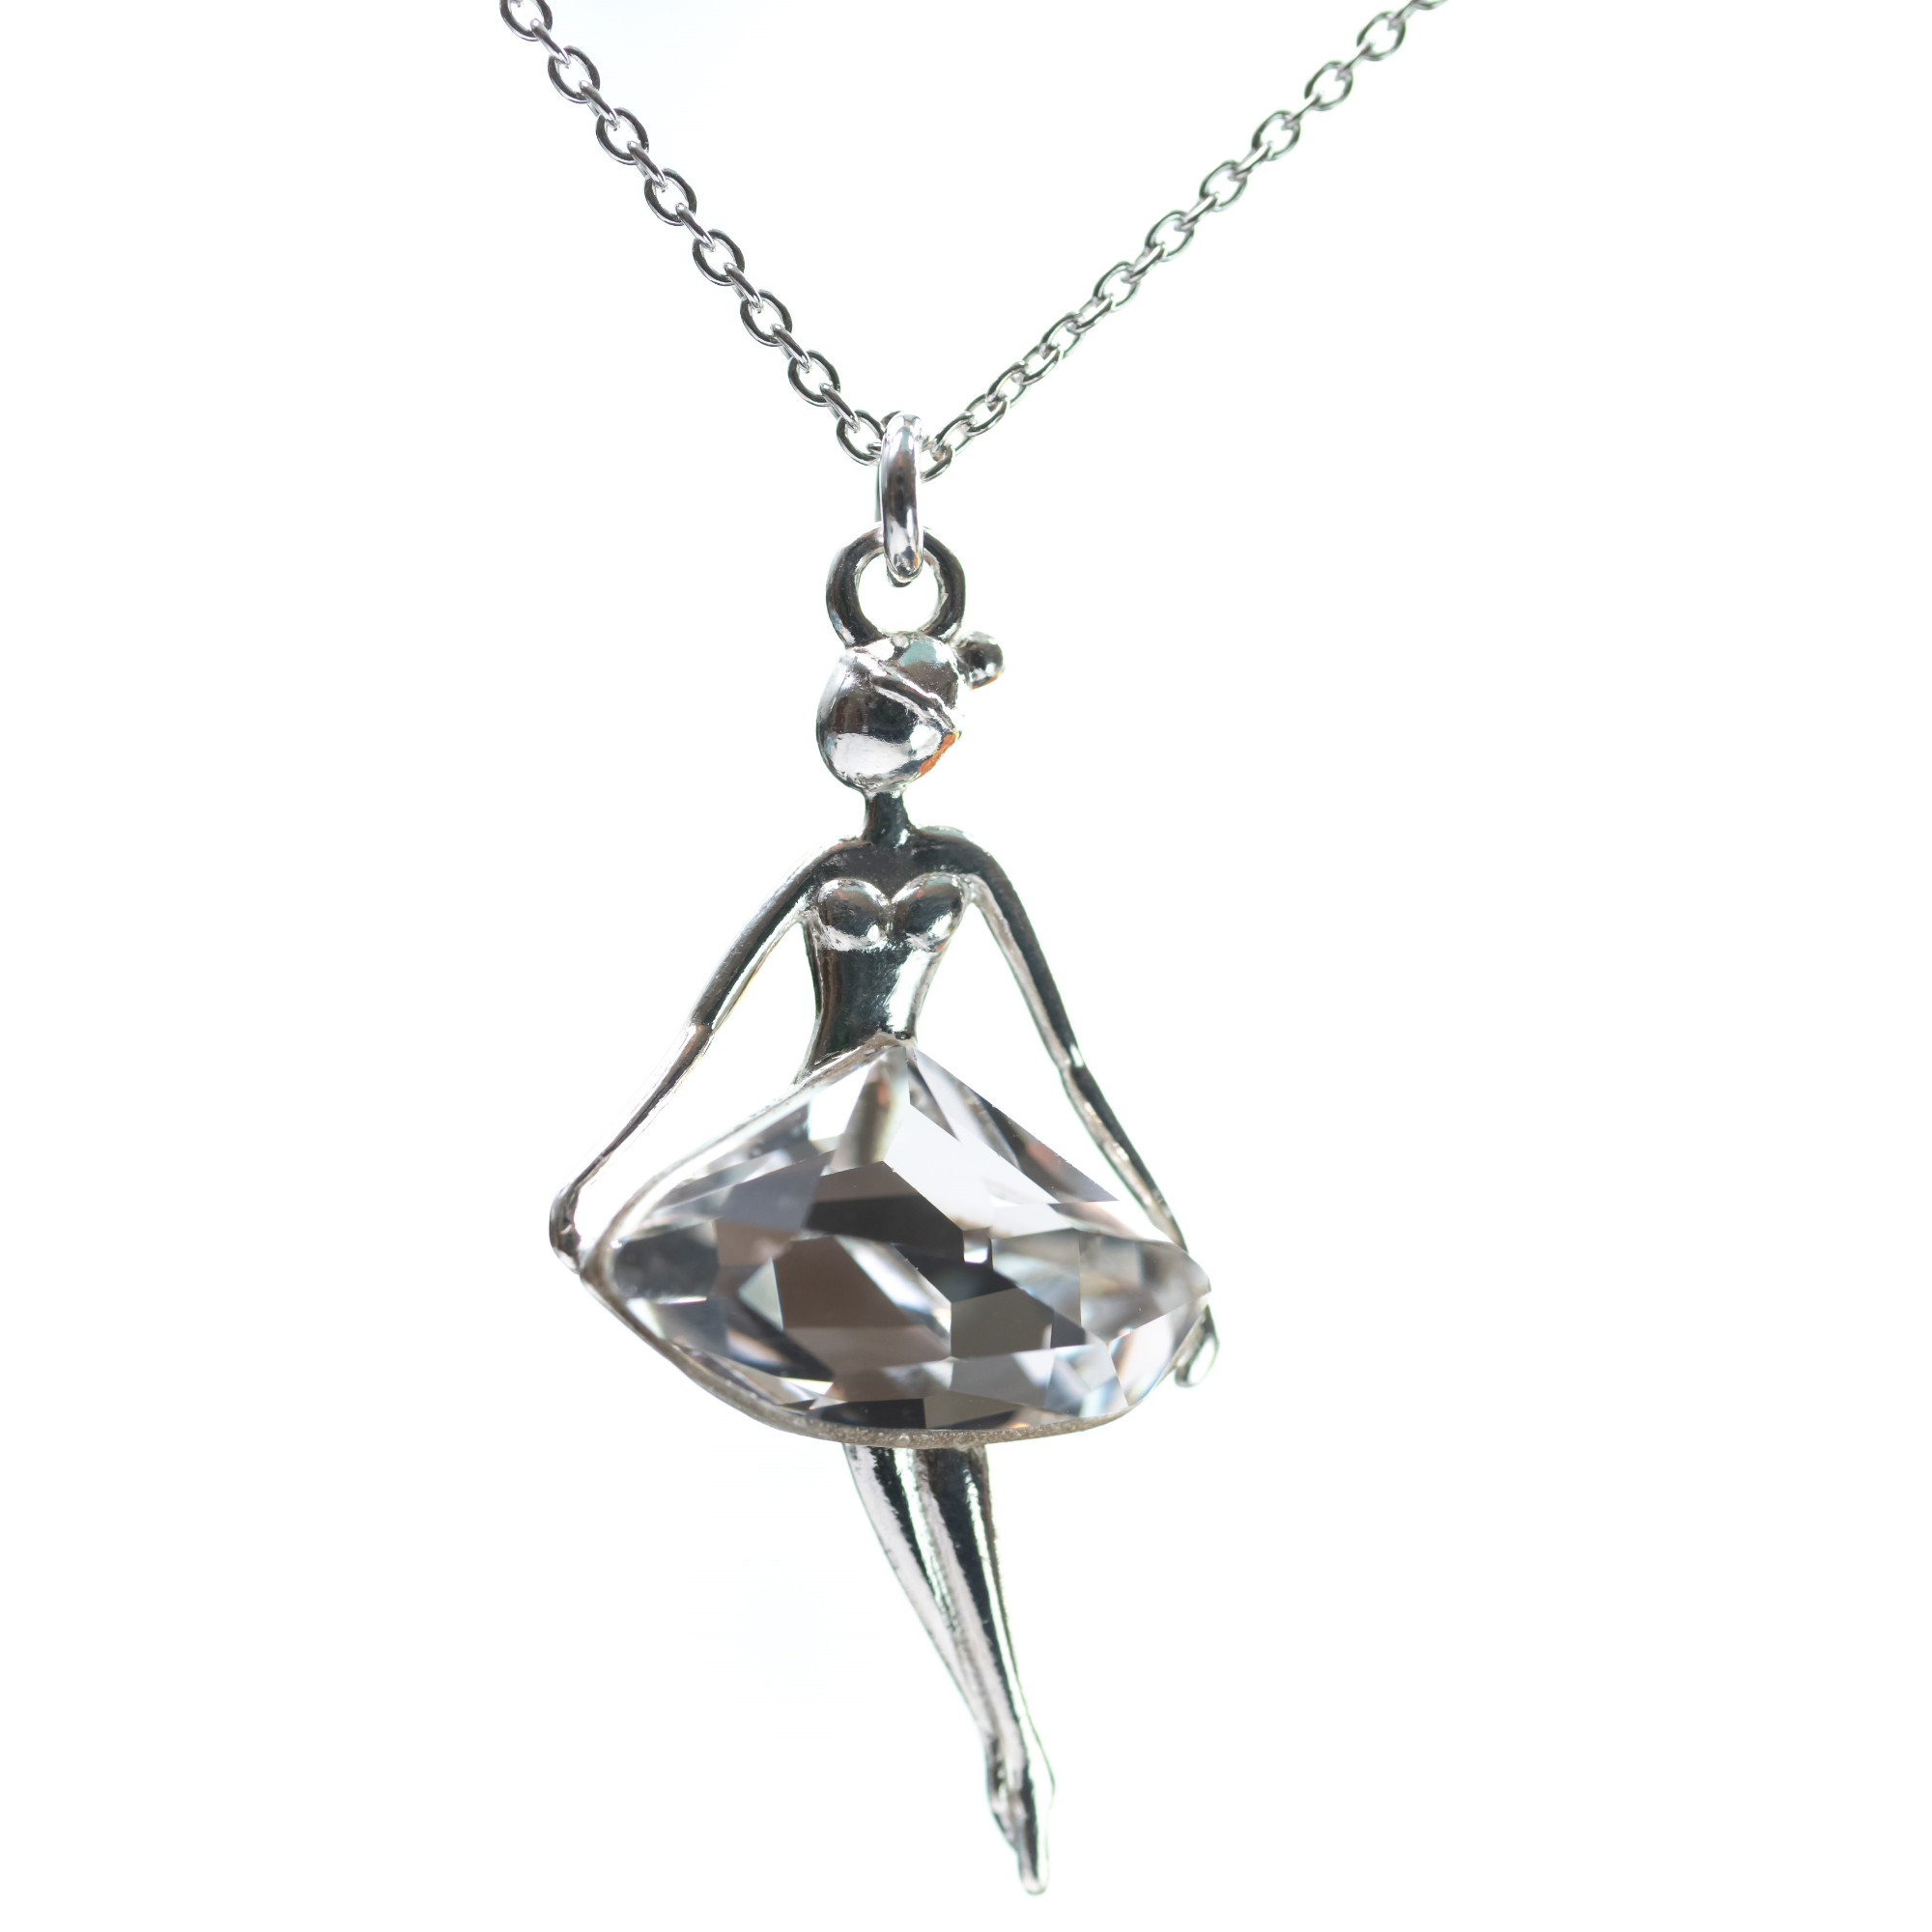 Sterling silver ballerina necklace with a luminous crystal clear skirt, a timeless elegance from Magpie Gems. in Ireland